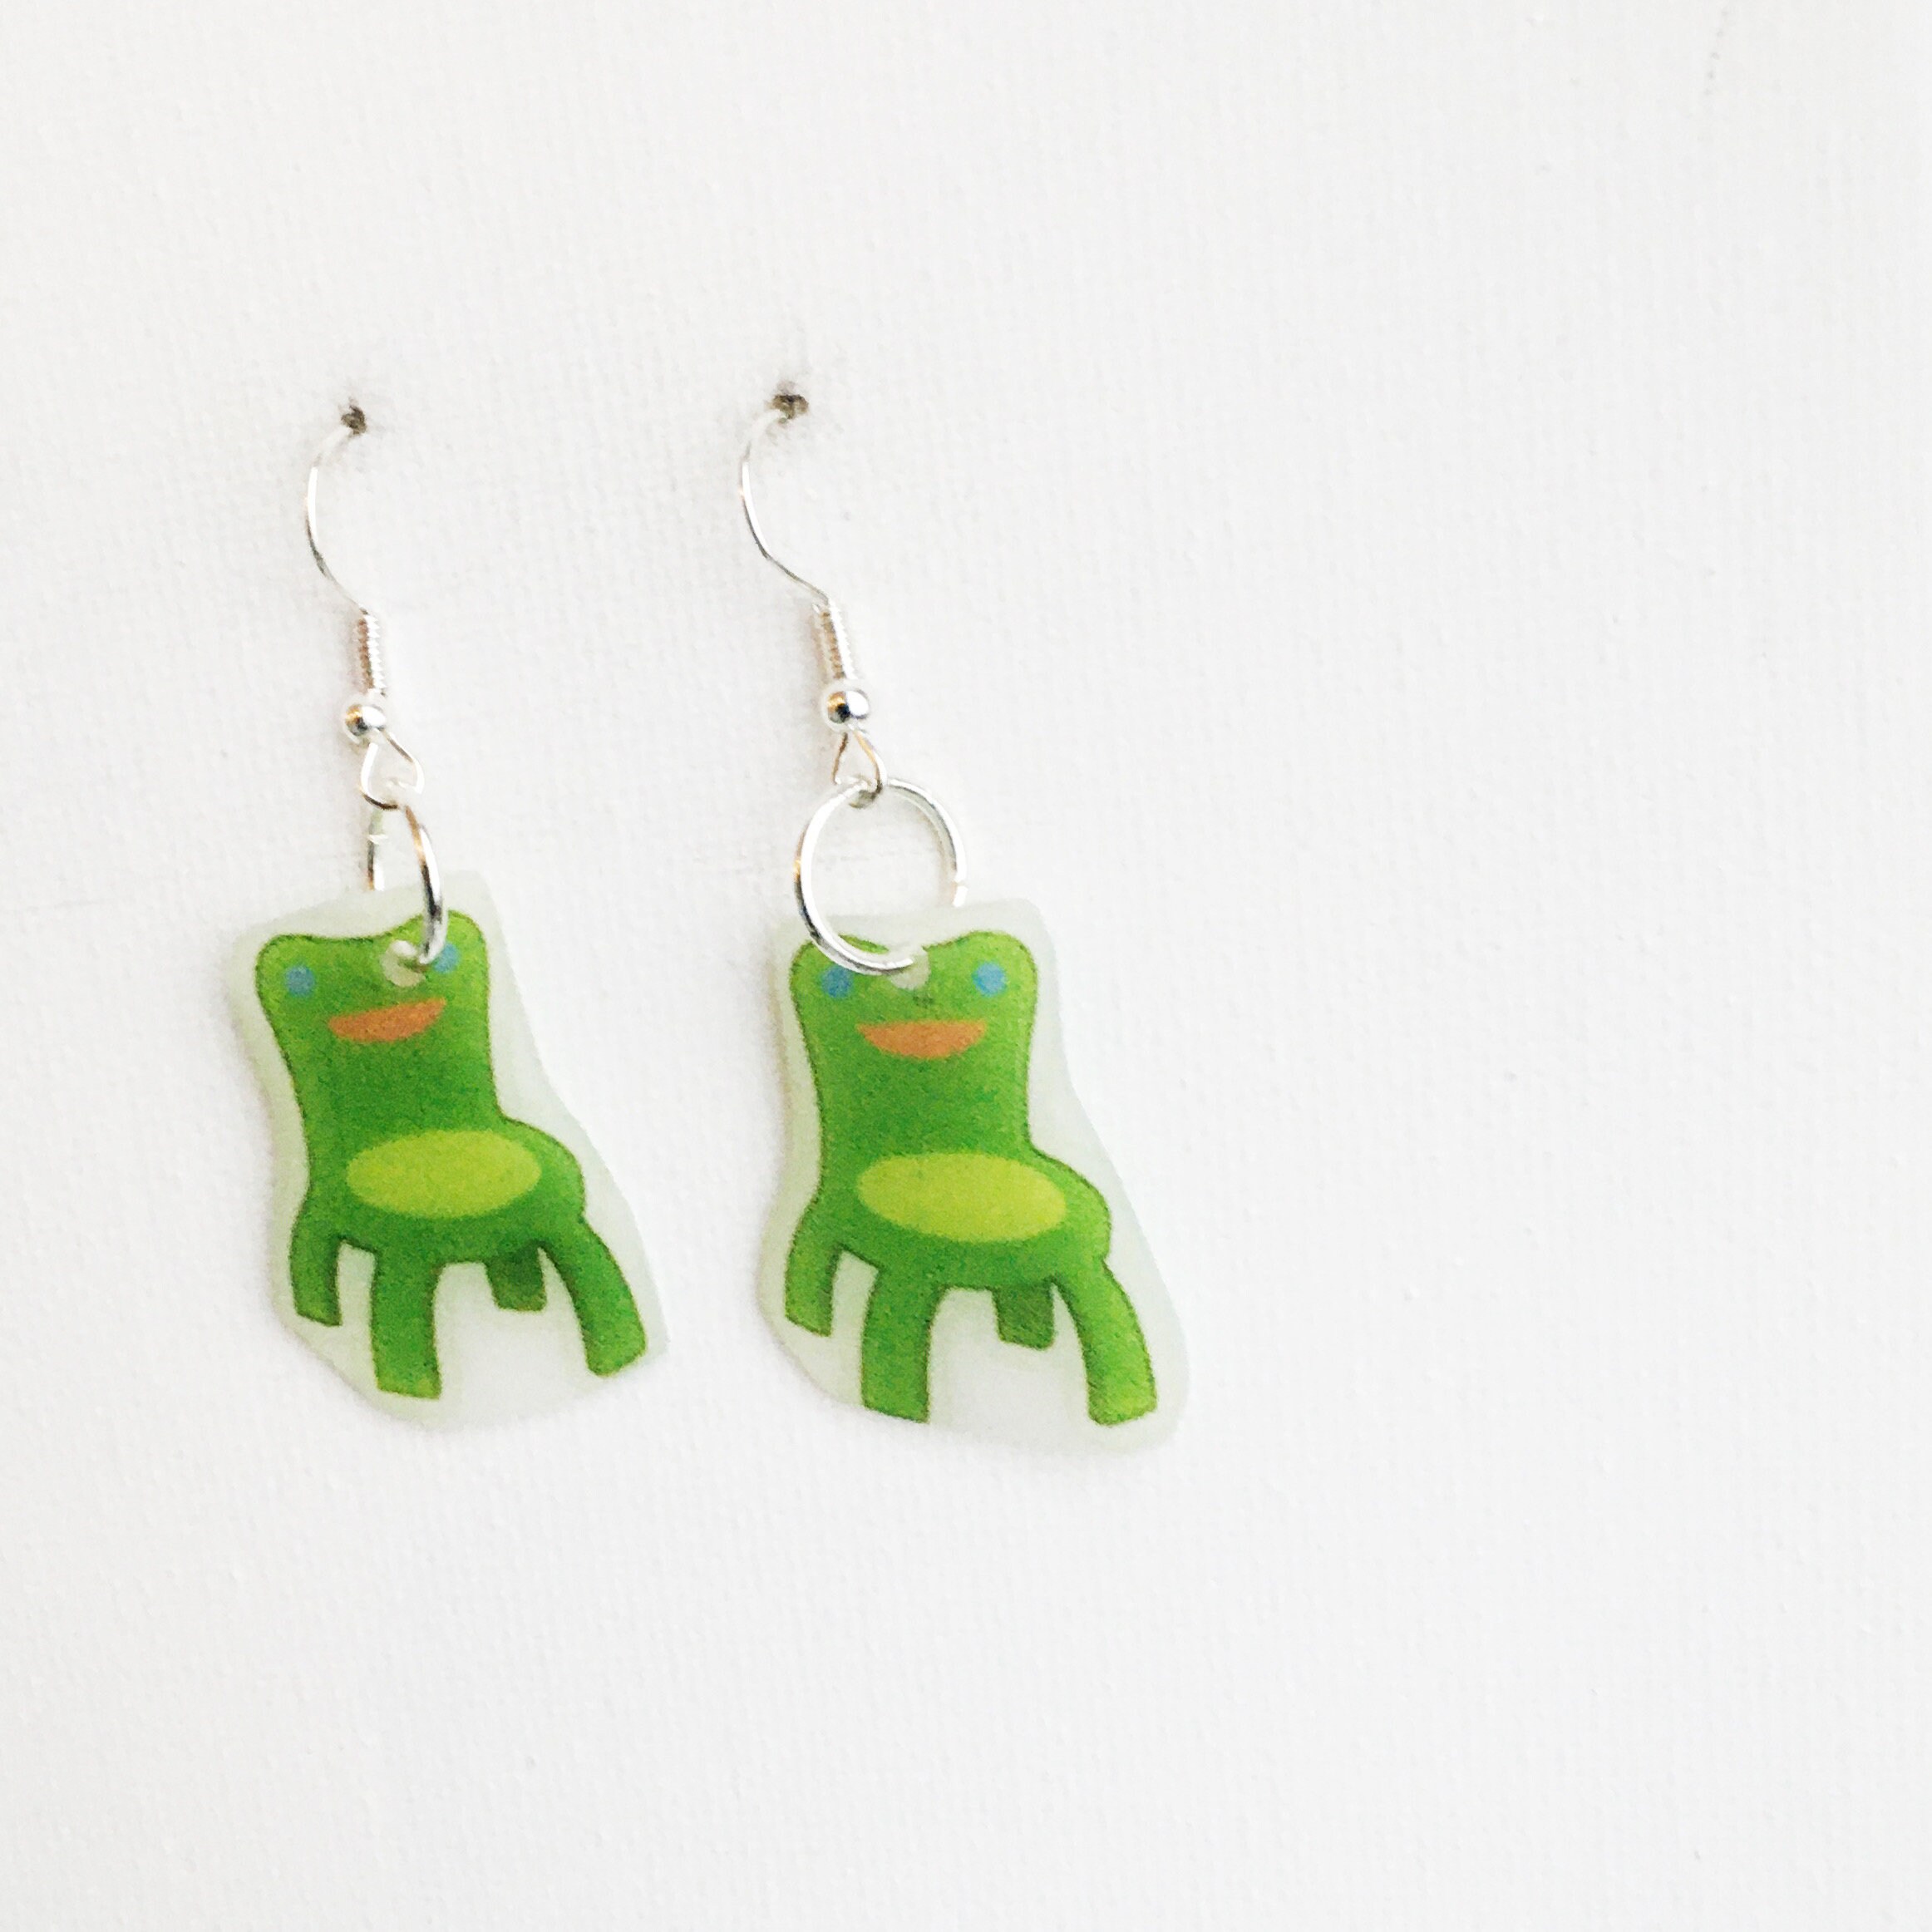 Minimalist Froggy Chair Earrings Etsy for Living room